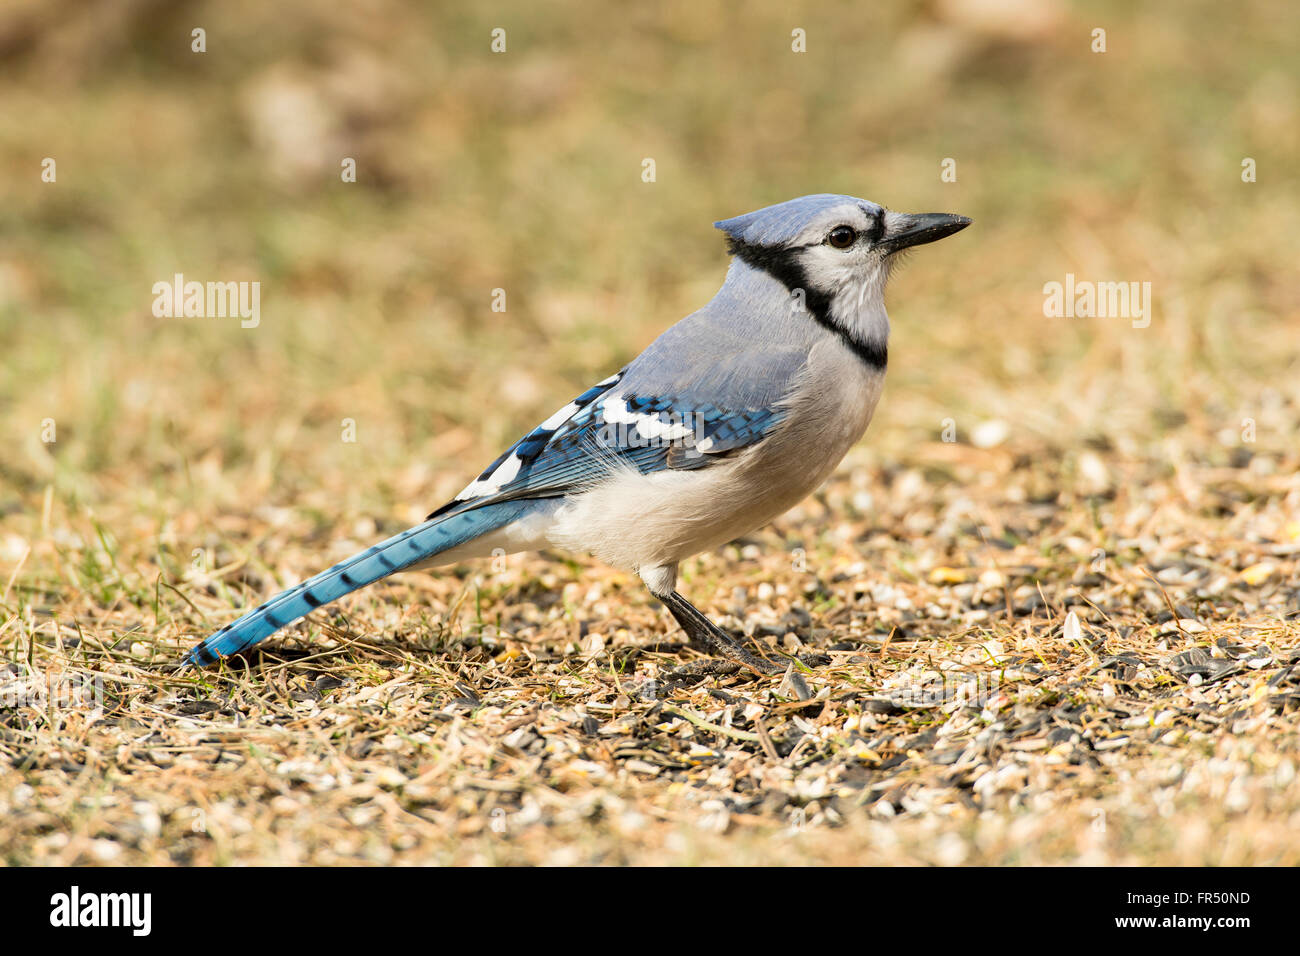 Blue Jay foraging for seeds spilled on ground. Stock Photo